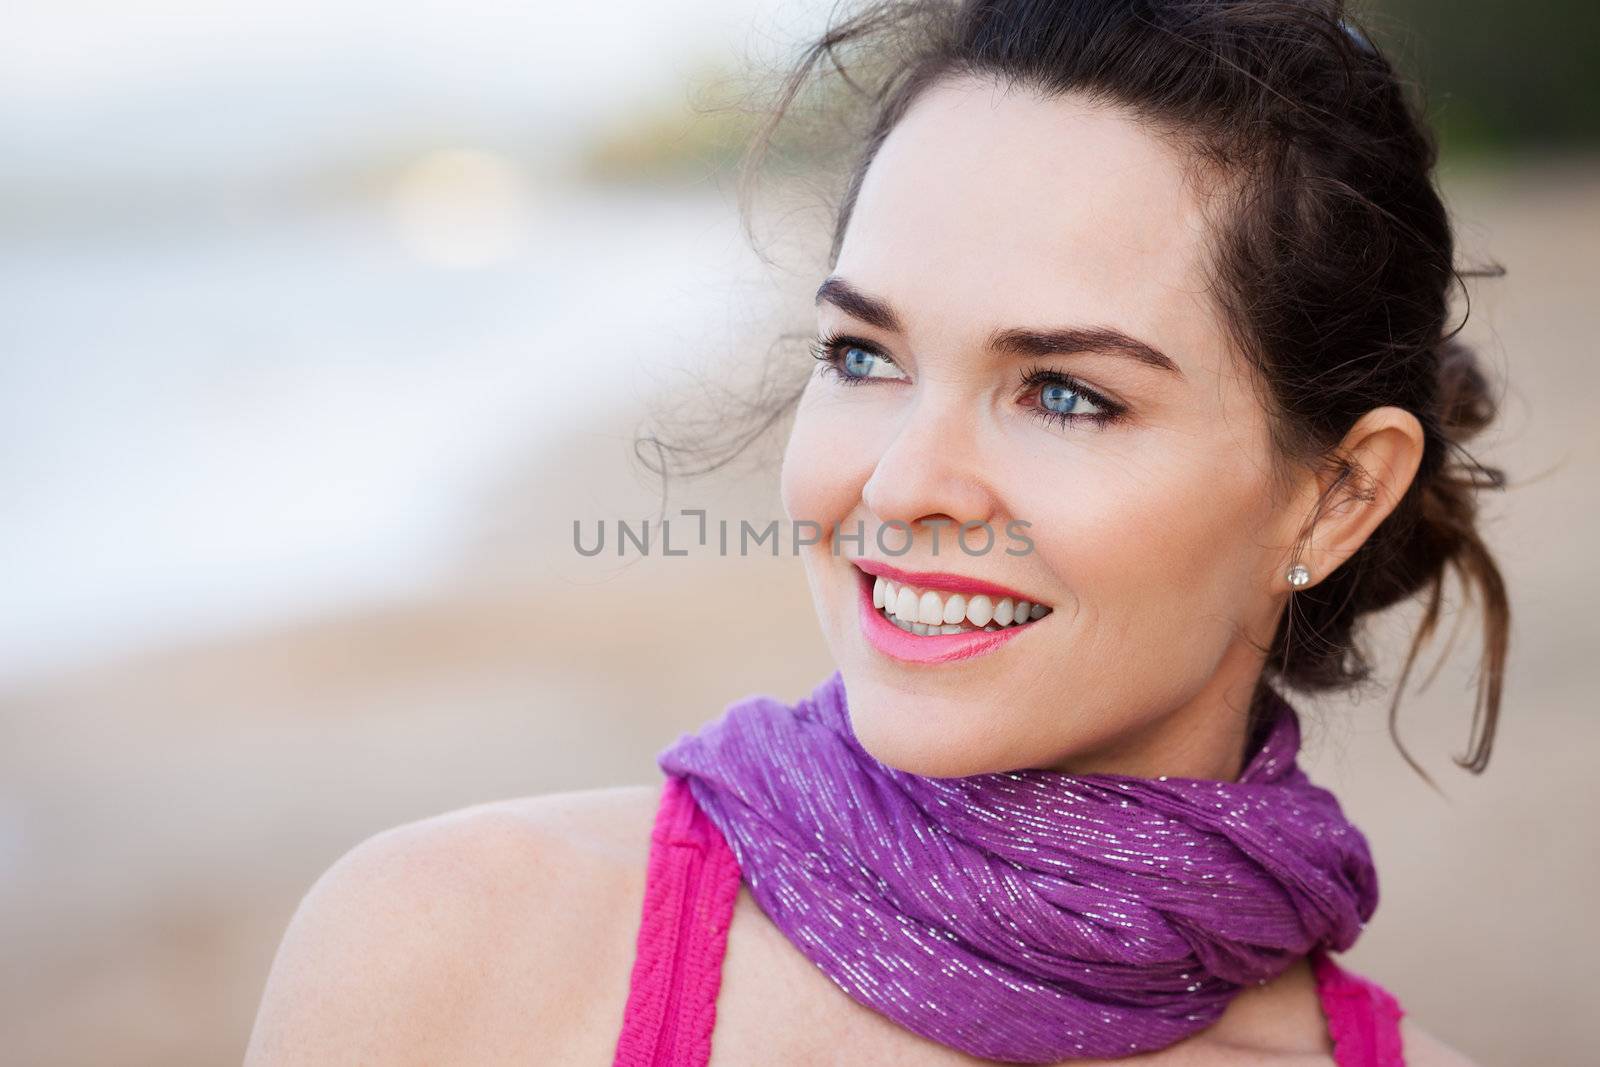 A close-up portrait of a beautiful happy  woman outdoors